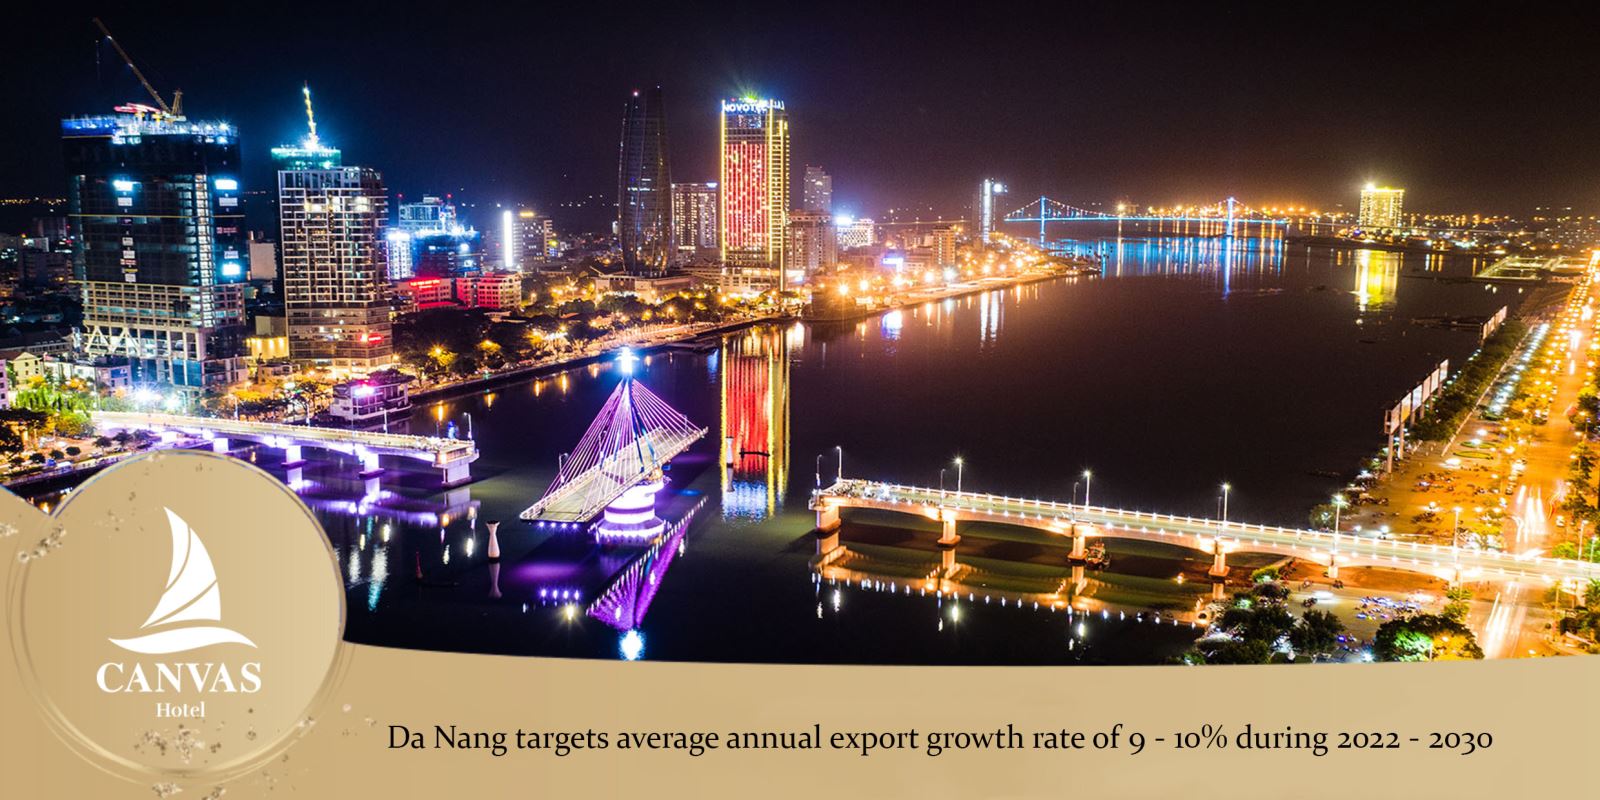 Da Nang targets average annual export growth rate of 9 - 10% during 2022 - 2030